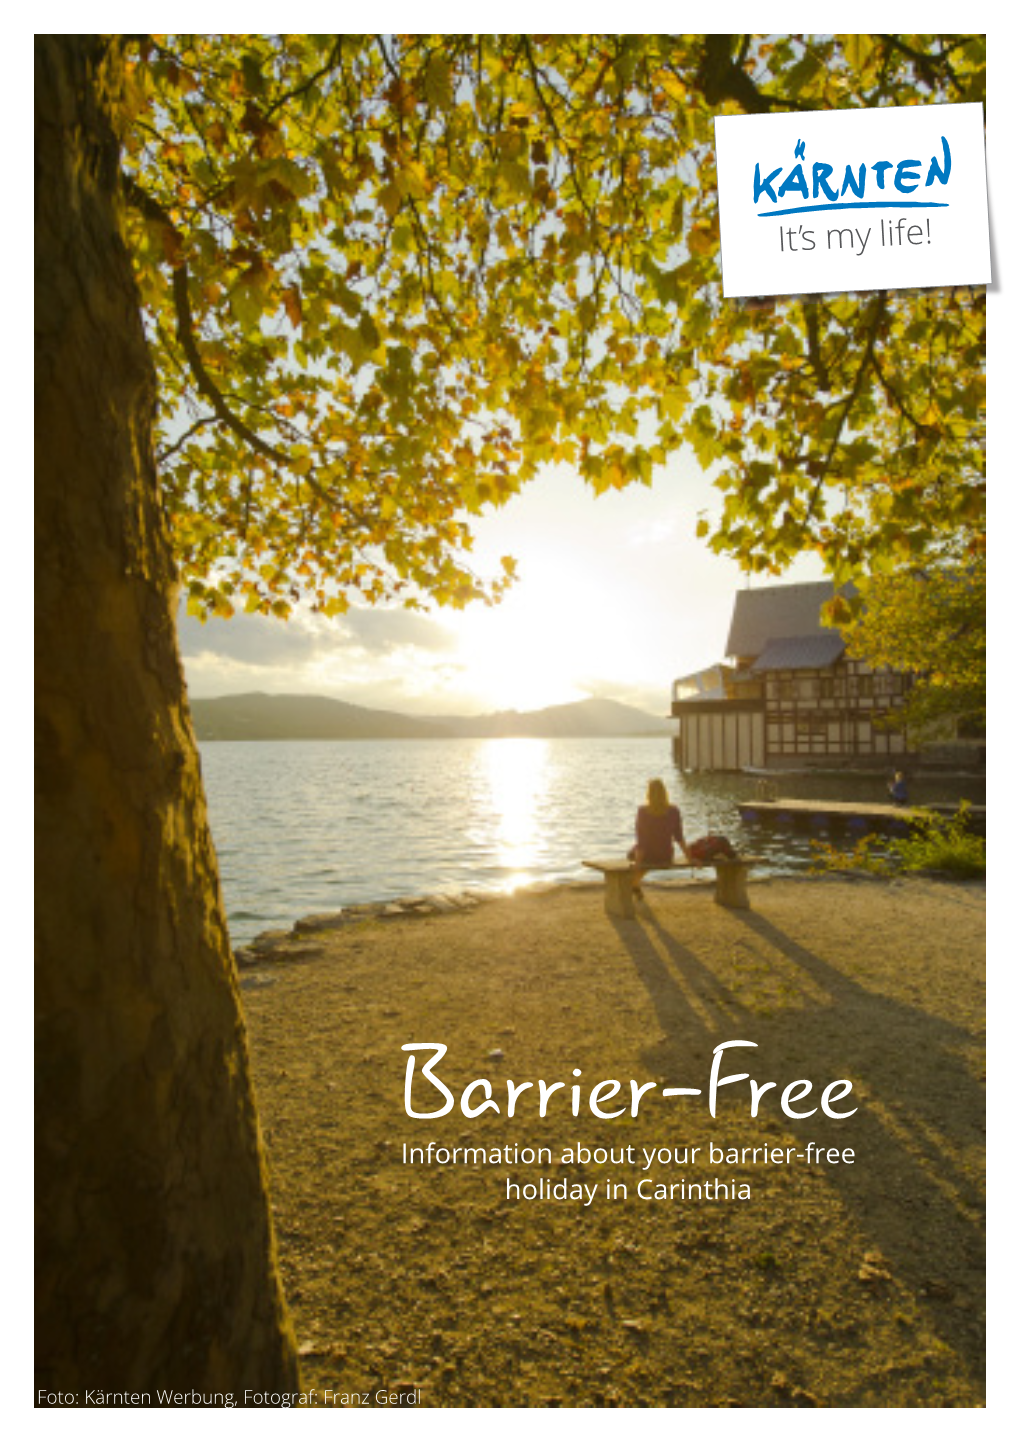 Barrier-Free Information About Your Barrier-Free Holiday in Carinthia